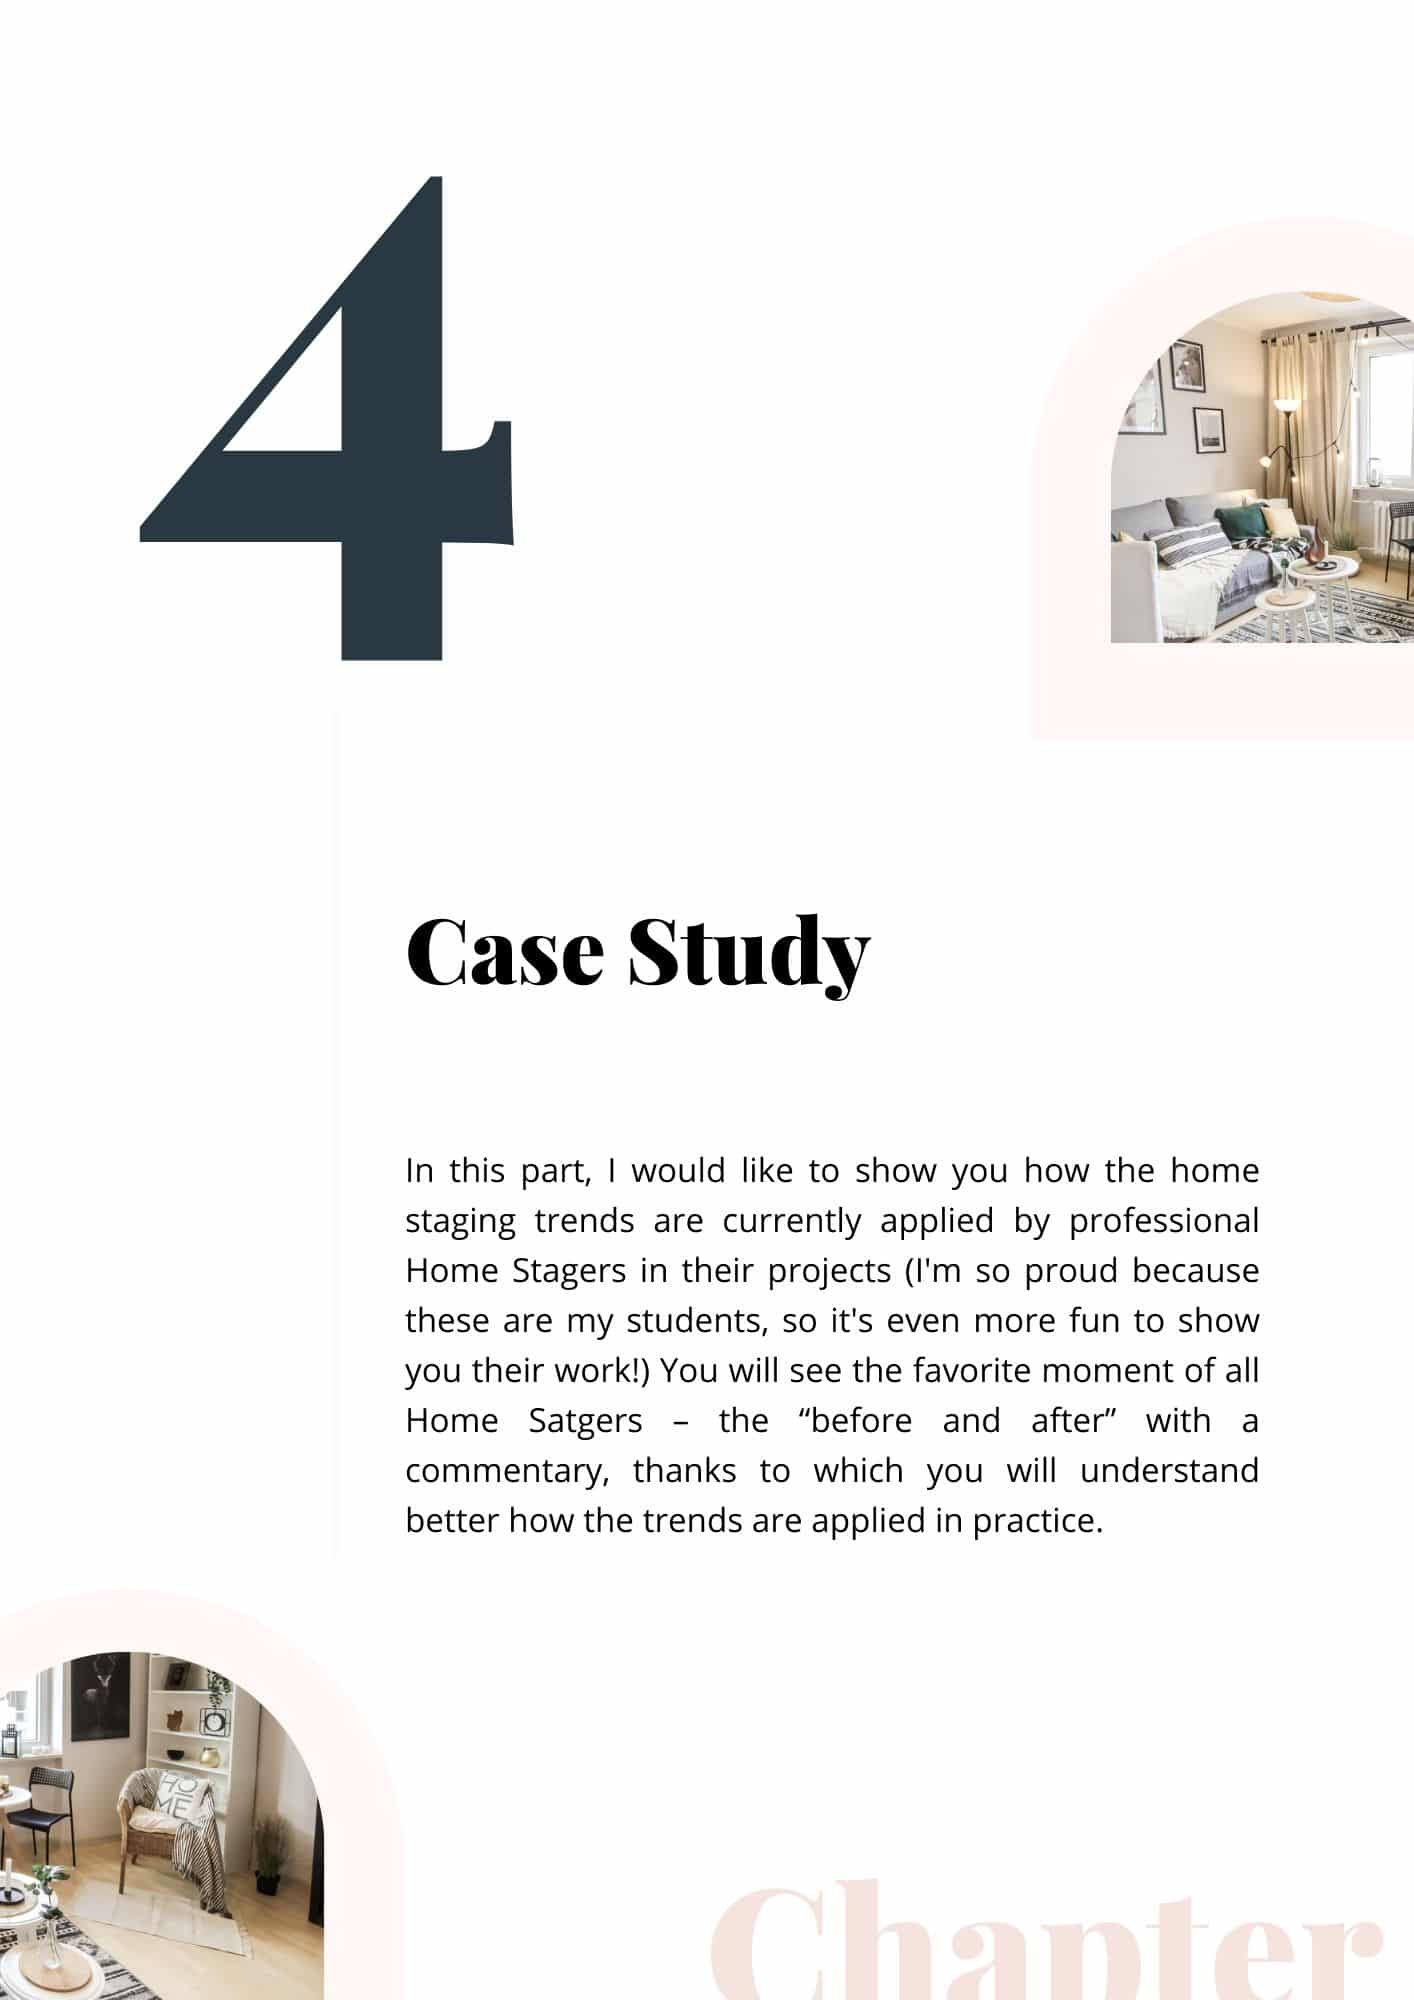 Home Staging Case Study